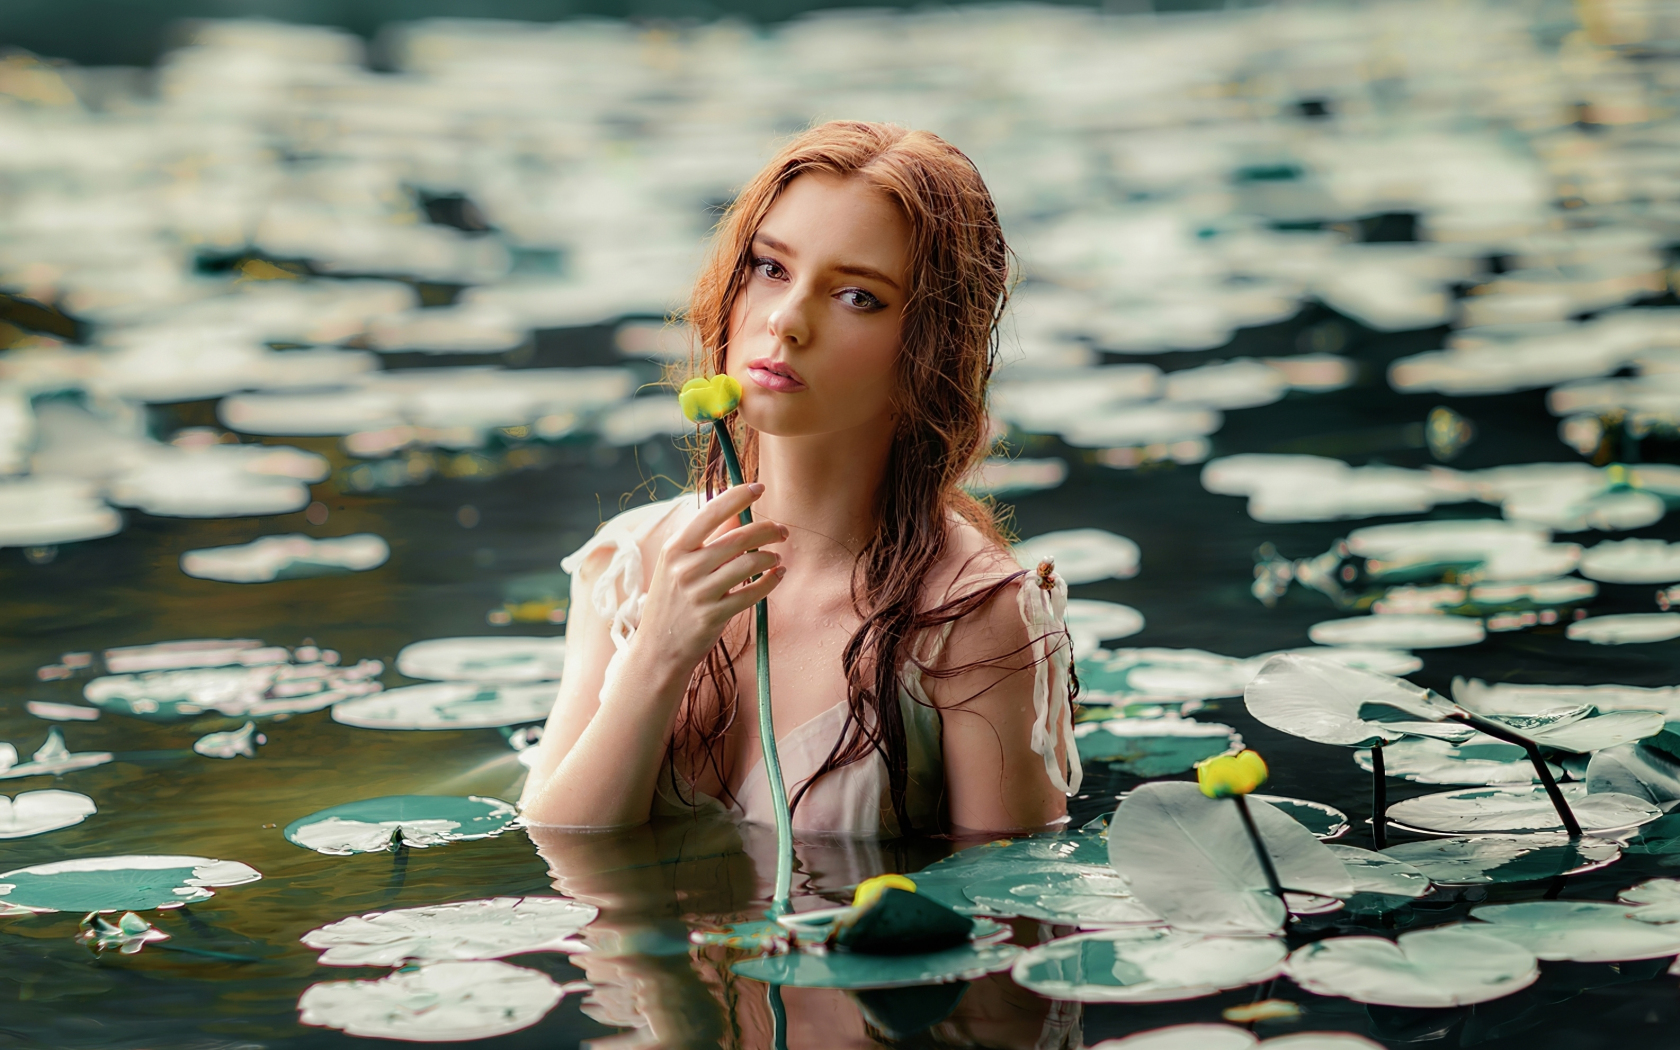 Download Wallpaper 1680x1050 Girl With Flowers Outdoor Lake 1610 Widescreen 1680x1050 Hd 1083